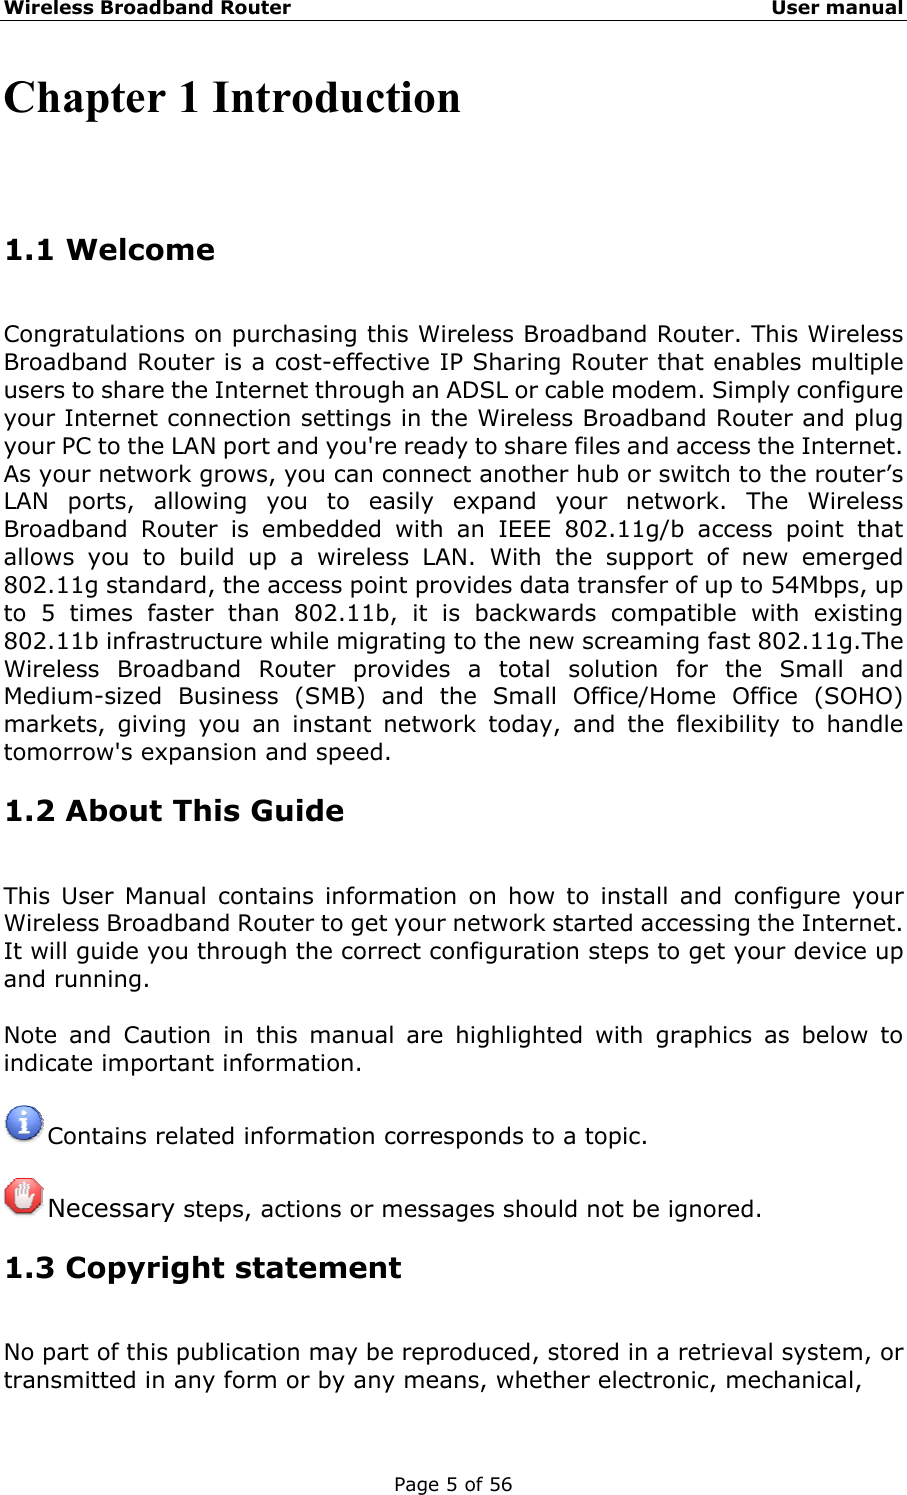 Wireless Broadband Router                                                   User manual Page 5 of 56 Chapter 1 Introduction 1.1 Welcome Congratulations on purchasing this Wireless Broadband Router. This Wireless Broadband Router is a cost-effective IP Sharing Router that enables multiple users to share the Internet through an ADSL or cable modem. Simply configure your Internet connection settings in the Wireless Broadband Router and plug your PC to the LAN port and you&apos;re ready to share files and access the Internet. As your network grows, you can connect another hub or switch to the router’s LAN ports, allowing you to easily expand your network. The Wireless Broadband Router is embedded with an IEEE 802.11g/b access point that allows you to build up a wireless LAN. With the support of new emerged 802.11g standard, the access point provides data transfer of up to 54Mbps, up to 5 times faster than 802.11b, it is backwards compatible with existing 802.11b infrastructure while migrating to the new screaming fast 802.11g.The Wireless Broadband Router provides a total solution for the Small and Medium-sized Business (SMB) and the Small Office/Home Office (SOHO) markets, giving you an instant network today, and the flexibility to handle tomorrow&apos;s expansion and speed. 1.2 About This Guide This User Manual contains information on how to install and configure your Wireless Broadband Router to get your network started accessing the Internet. It will guide you through the correct configuration steps to get your device up and running.  Note and Caution in this manual are highlighted with graphics as below to indicate important information.   Contains related information corresponds to a topic.   Necessary steps, actions or messages should not be ignored. 1.3 Copyright statement No part of this publication may be reproduced, stored in a retrieval system, or transmitted in any form or by any means, whether electronic, mechanical, 